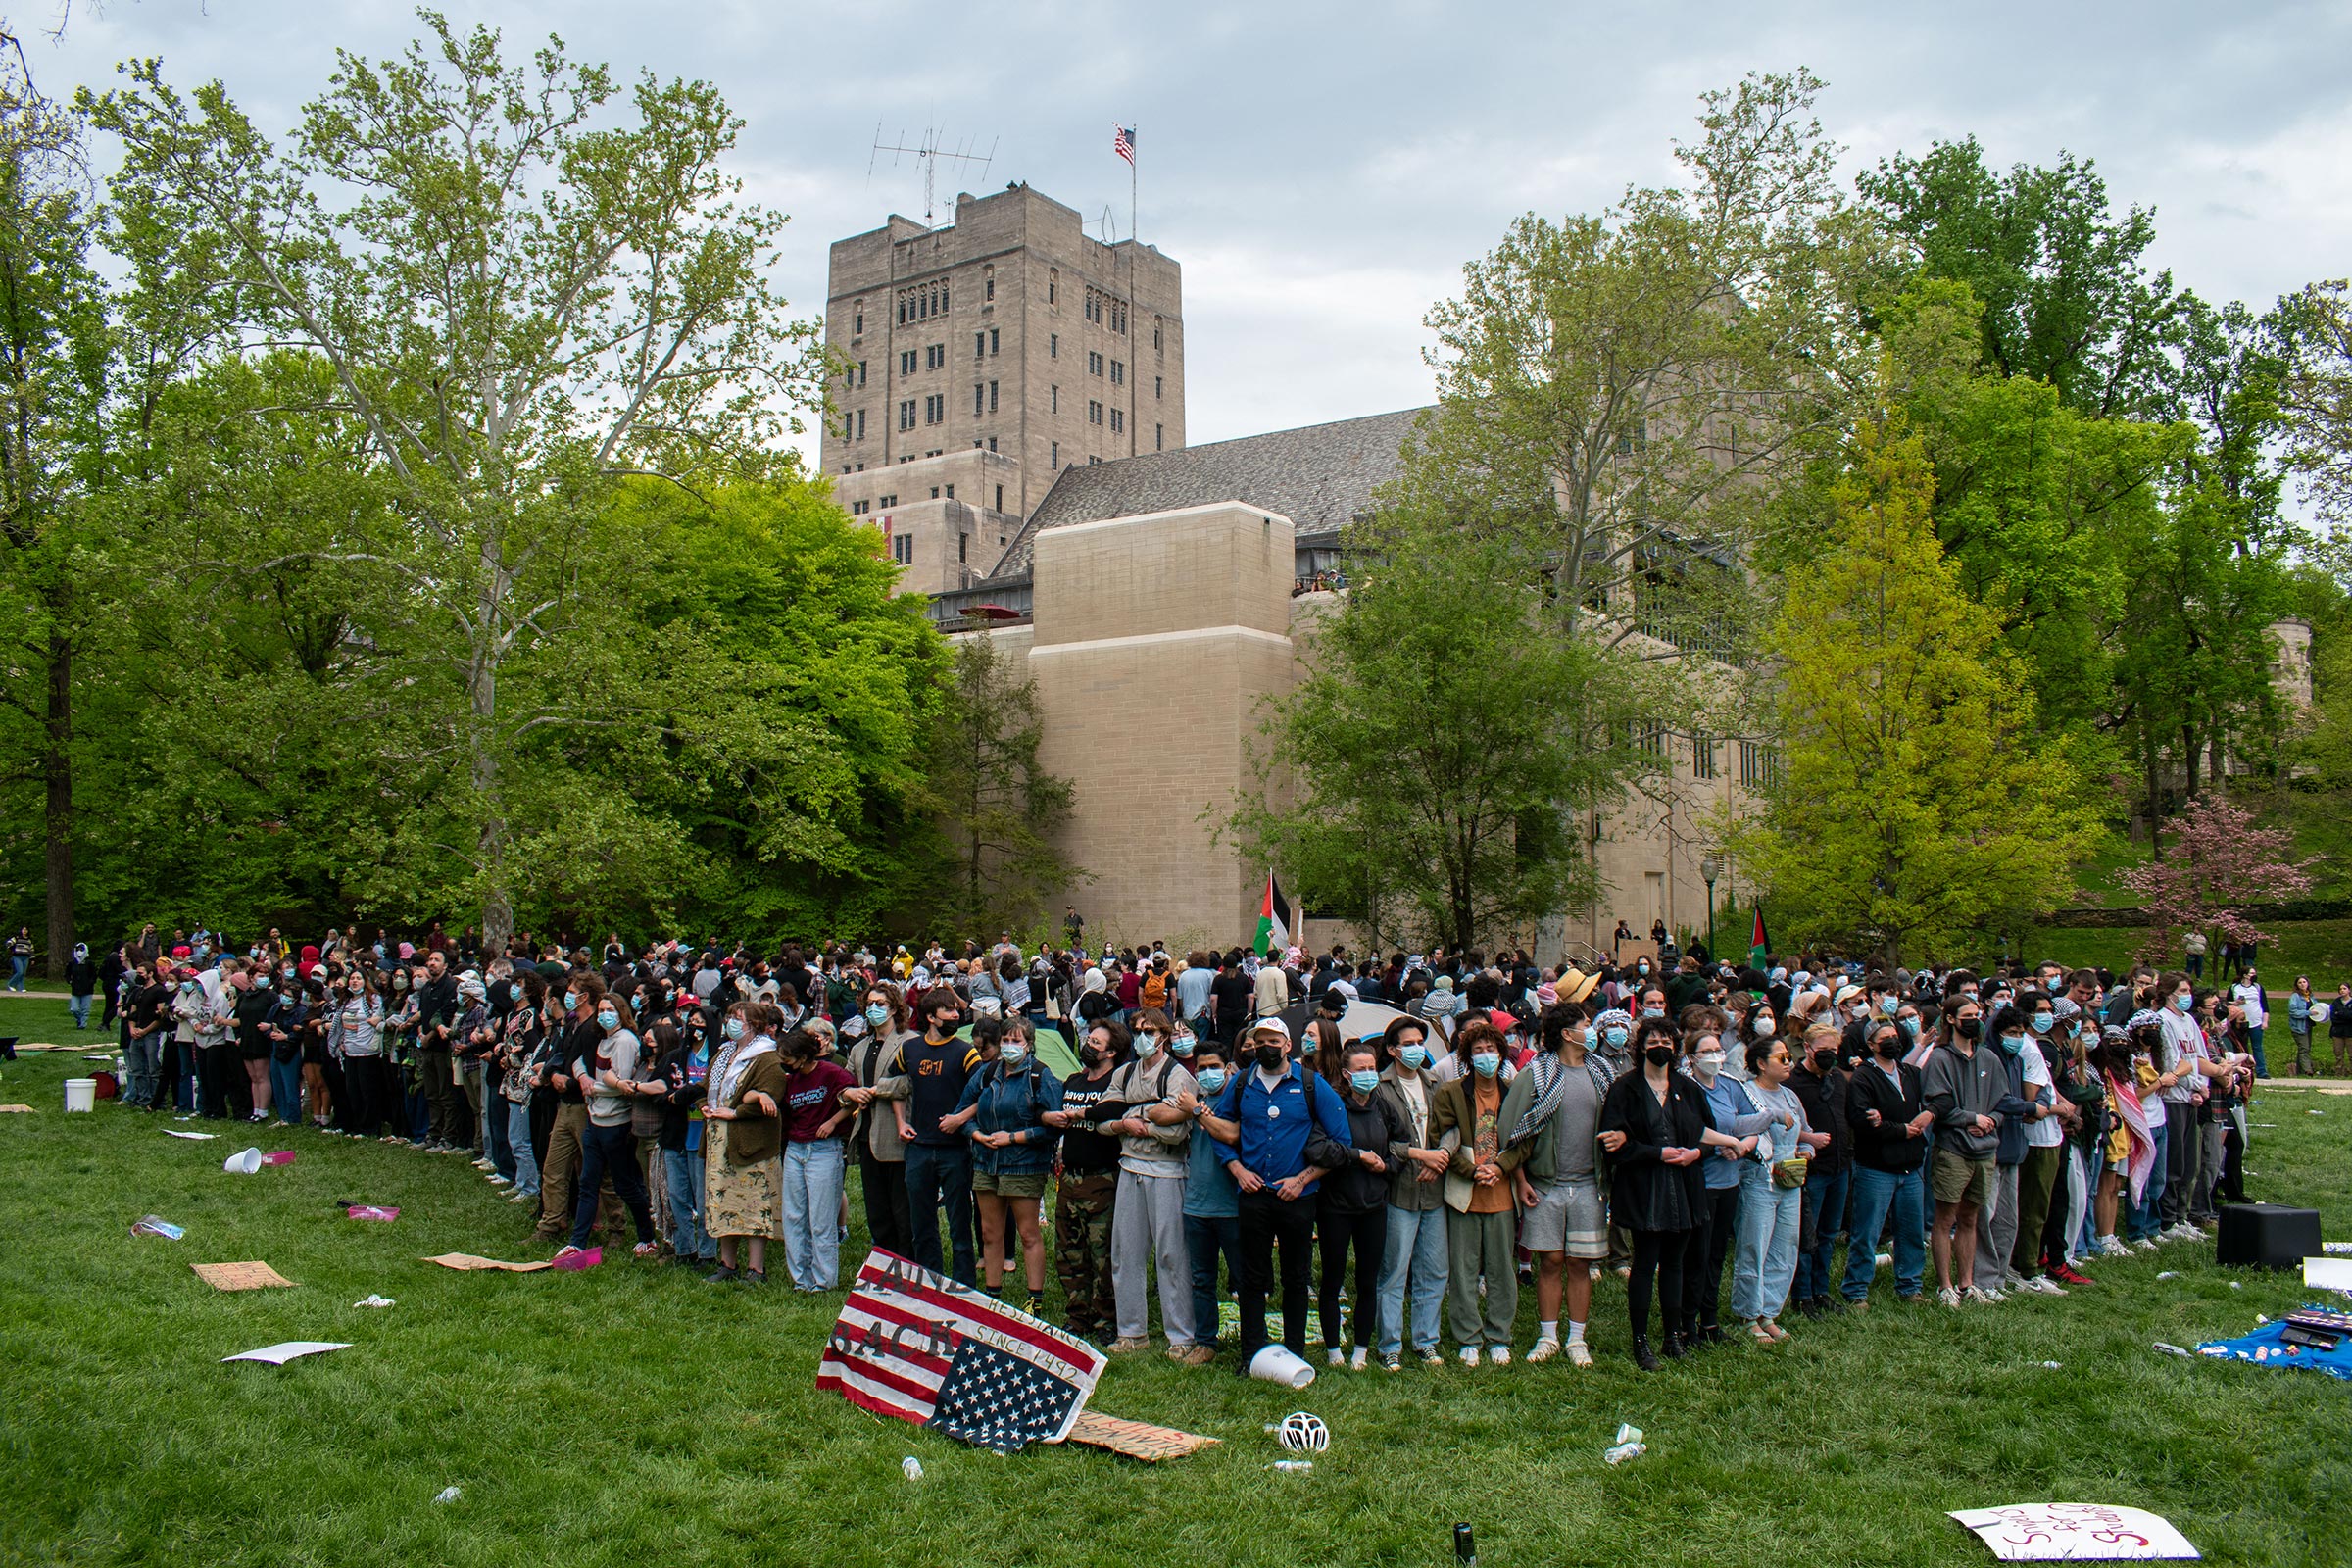 More than 100 pro-Palestinian protesters link arms to surround an encampment on April 26, outside the Indiana Memorial Union in Bloomington. Inside the encampment, there was food, medical supplies, tents, and a pile of backpacks.